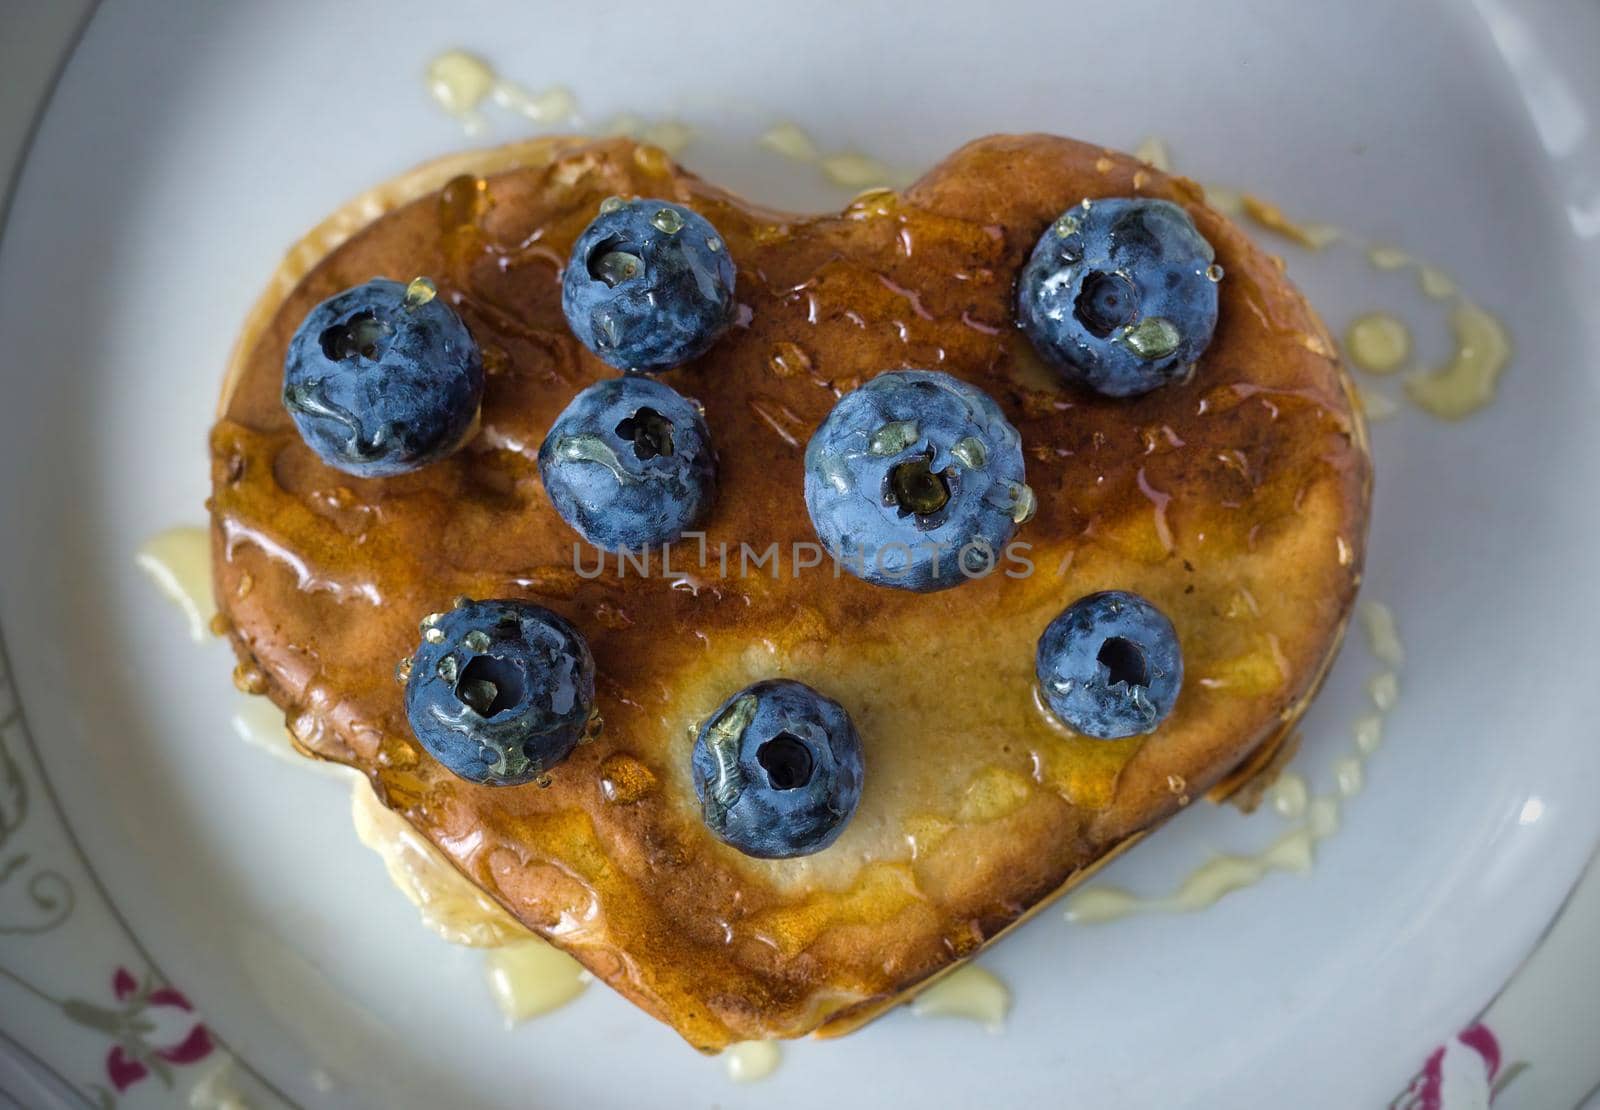 Healthy food concept displaying image of full heart shape pan cake with blueberries fruit and honey on top isolated on white background